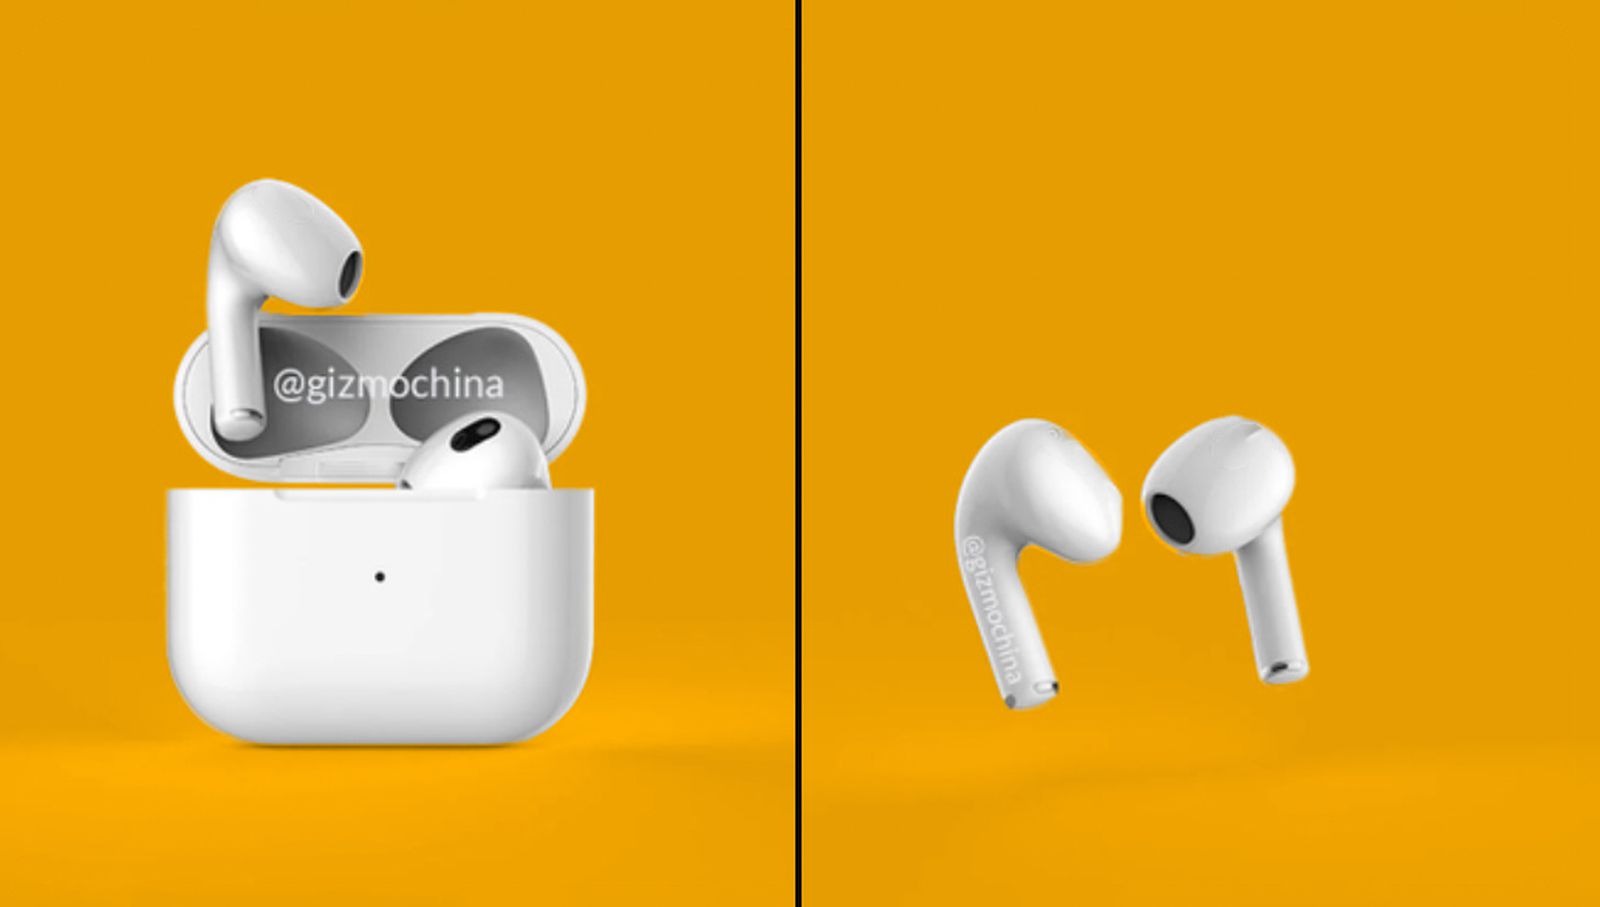 Proven Leaker says new AirPods ready for shipping, new 12.9-inch iPad Pro will likely sell 11-inch model